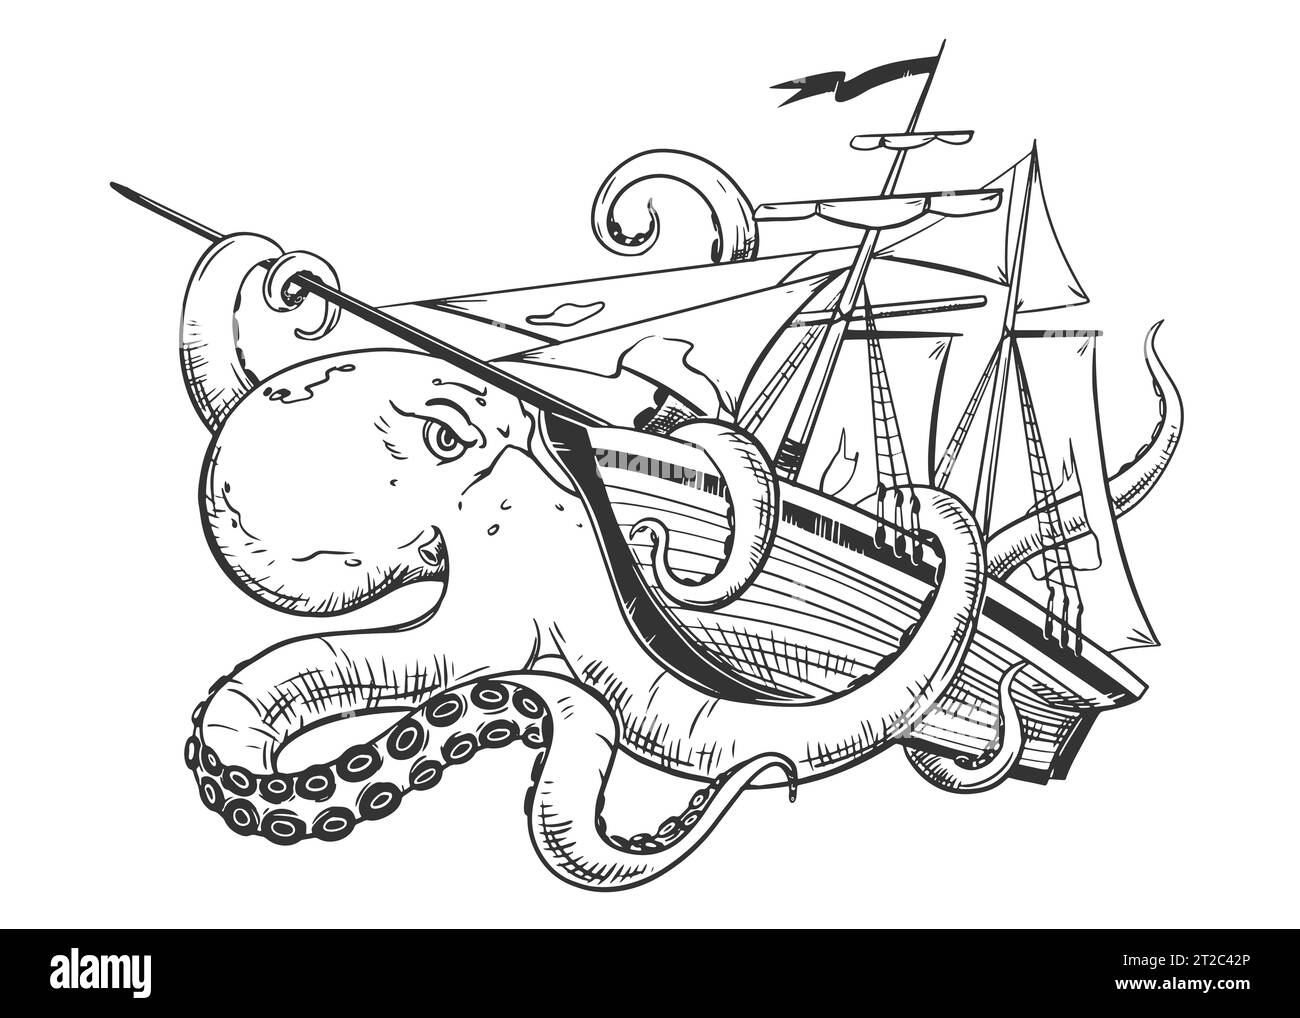 An angry kraken is attacking a commercial sailboat. The octopus wraps its tentacles around the sailboat and pulls it to the bottom. Vector image of a Stock Vector